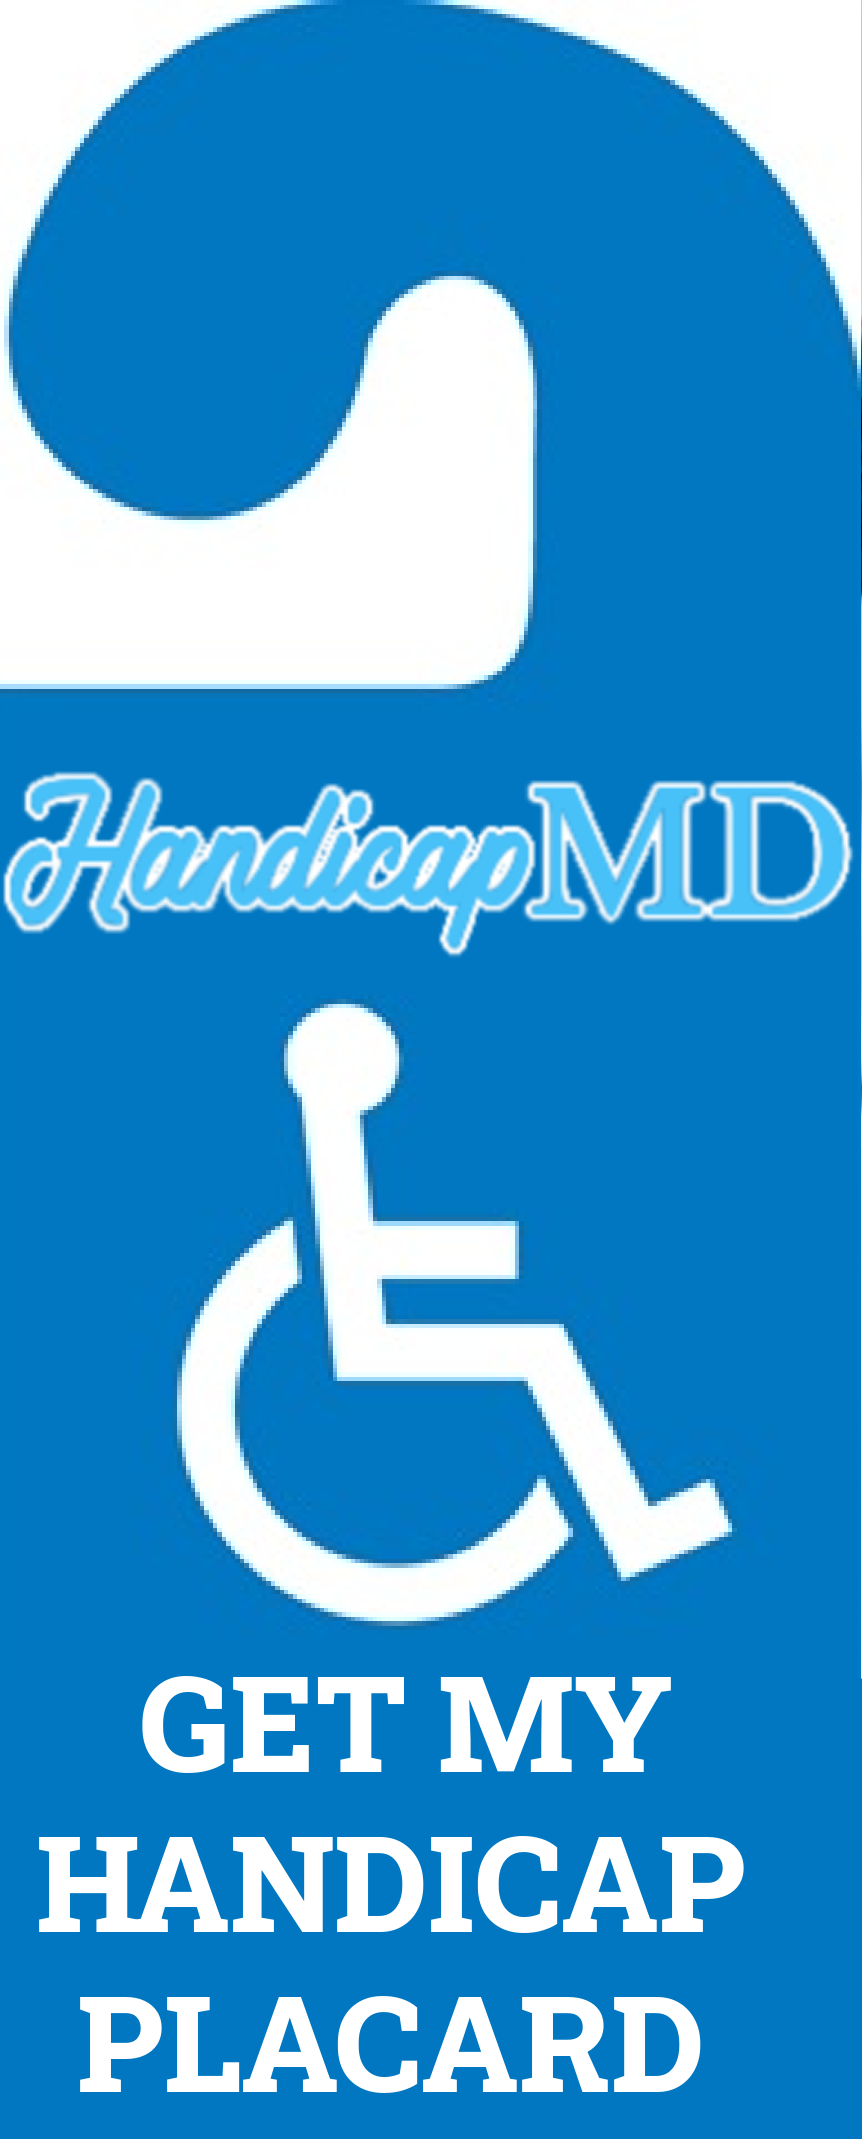 Tips for Making the Most of Your Handicap Placard in Maryland